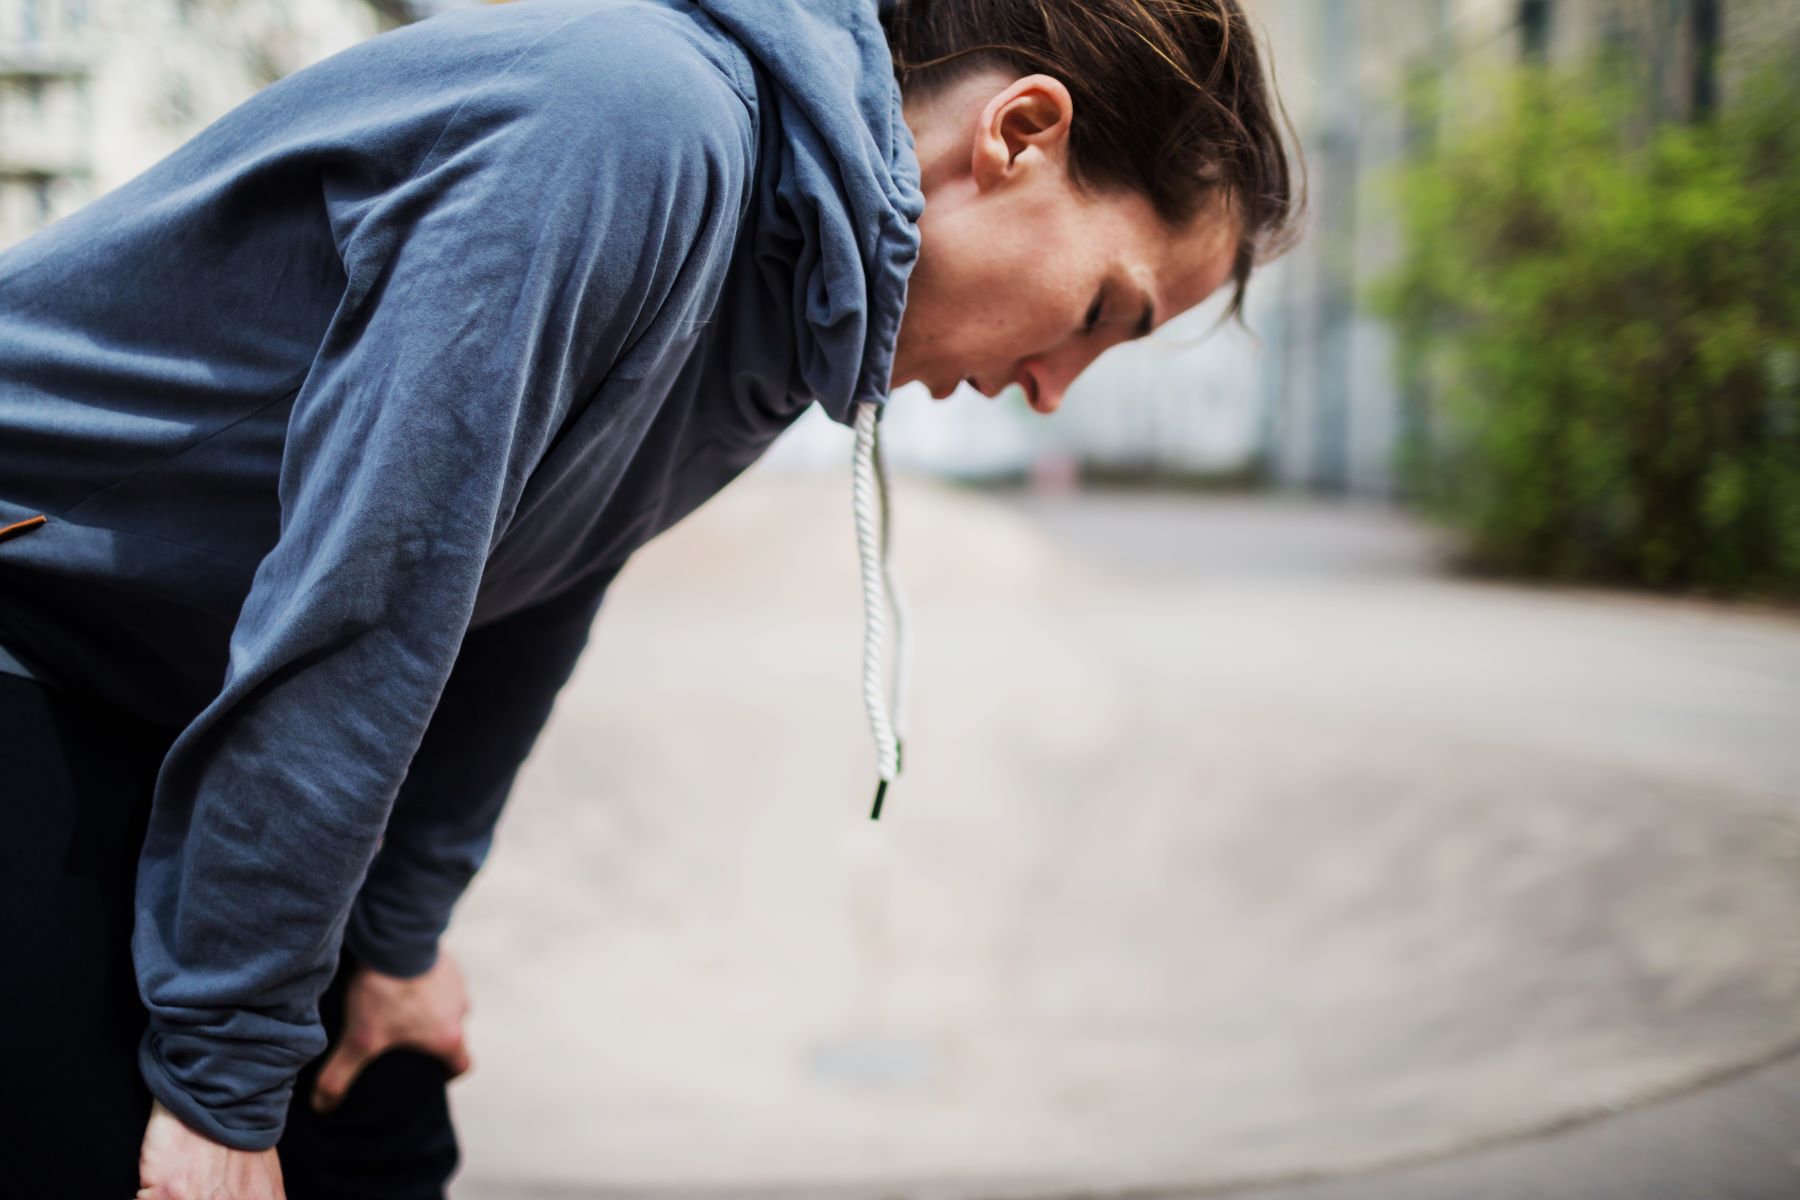 16 Terrible Excuses For A Poor Running Performance